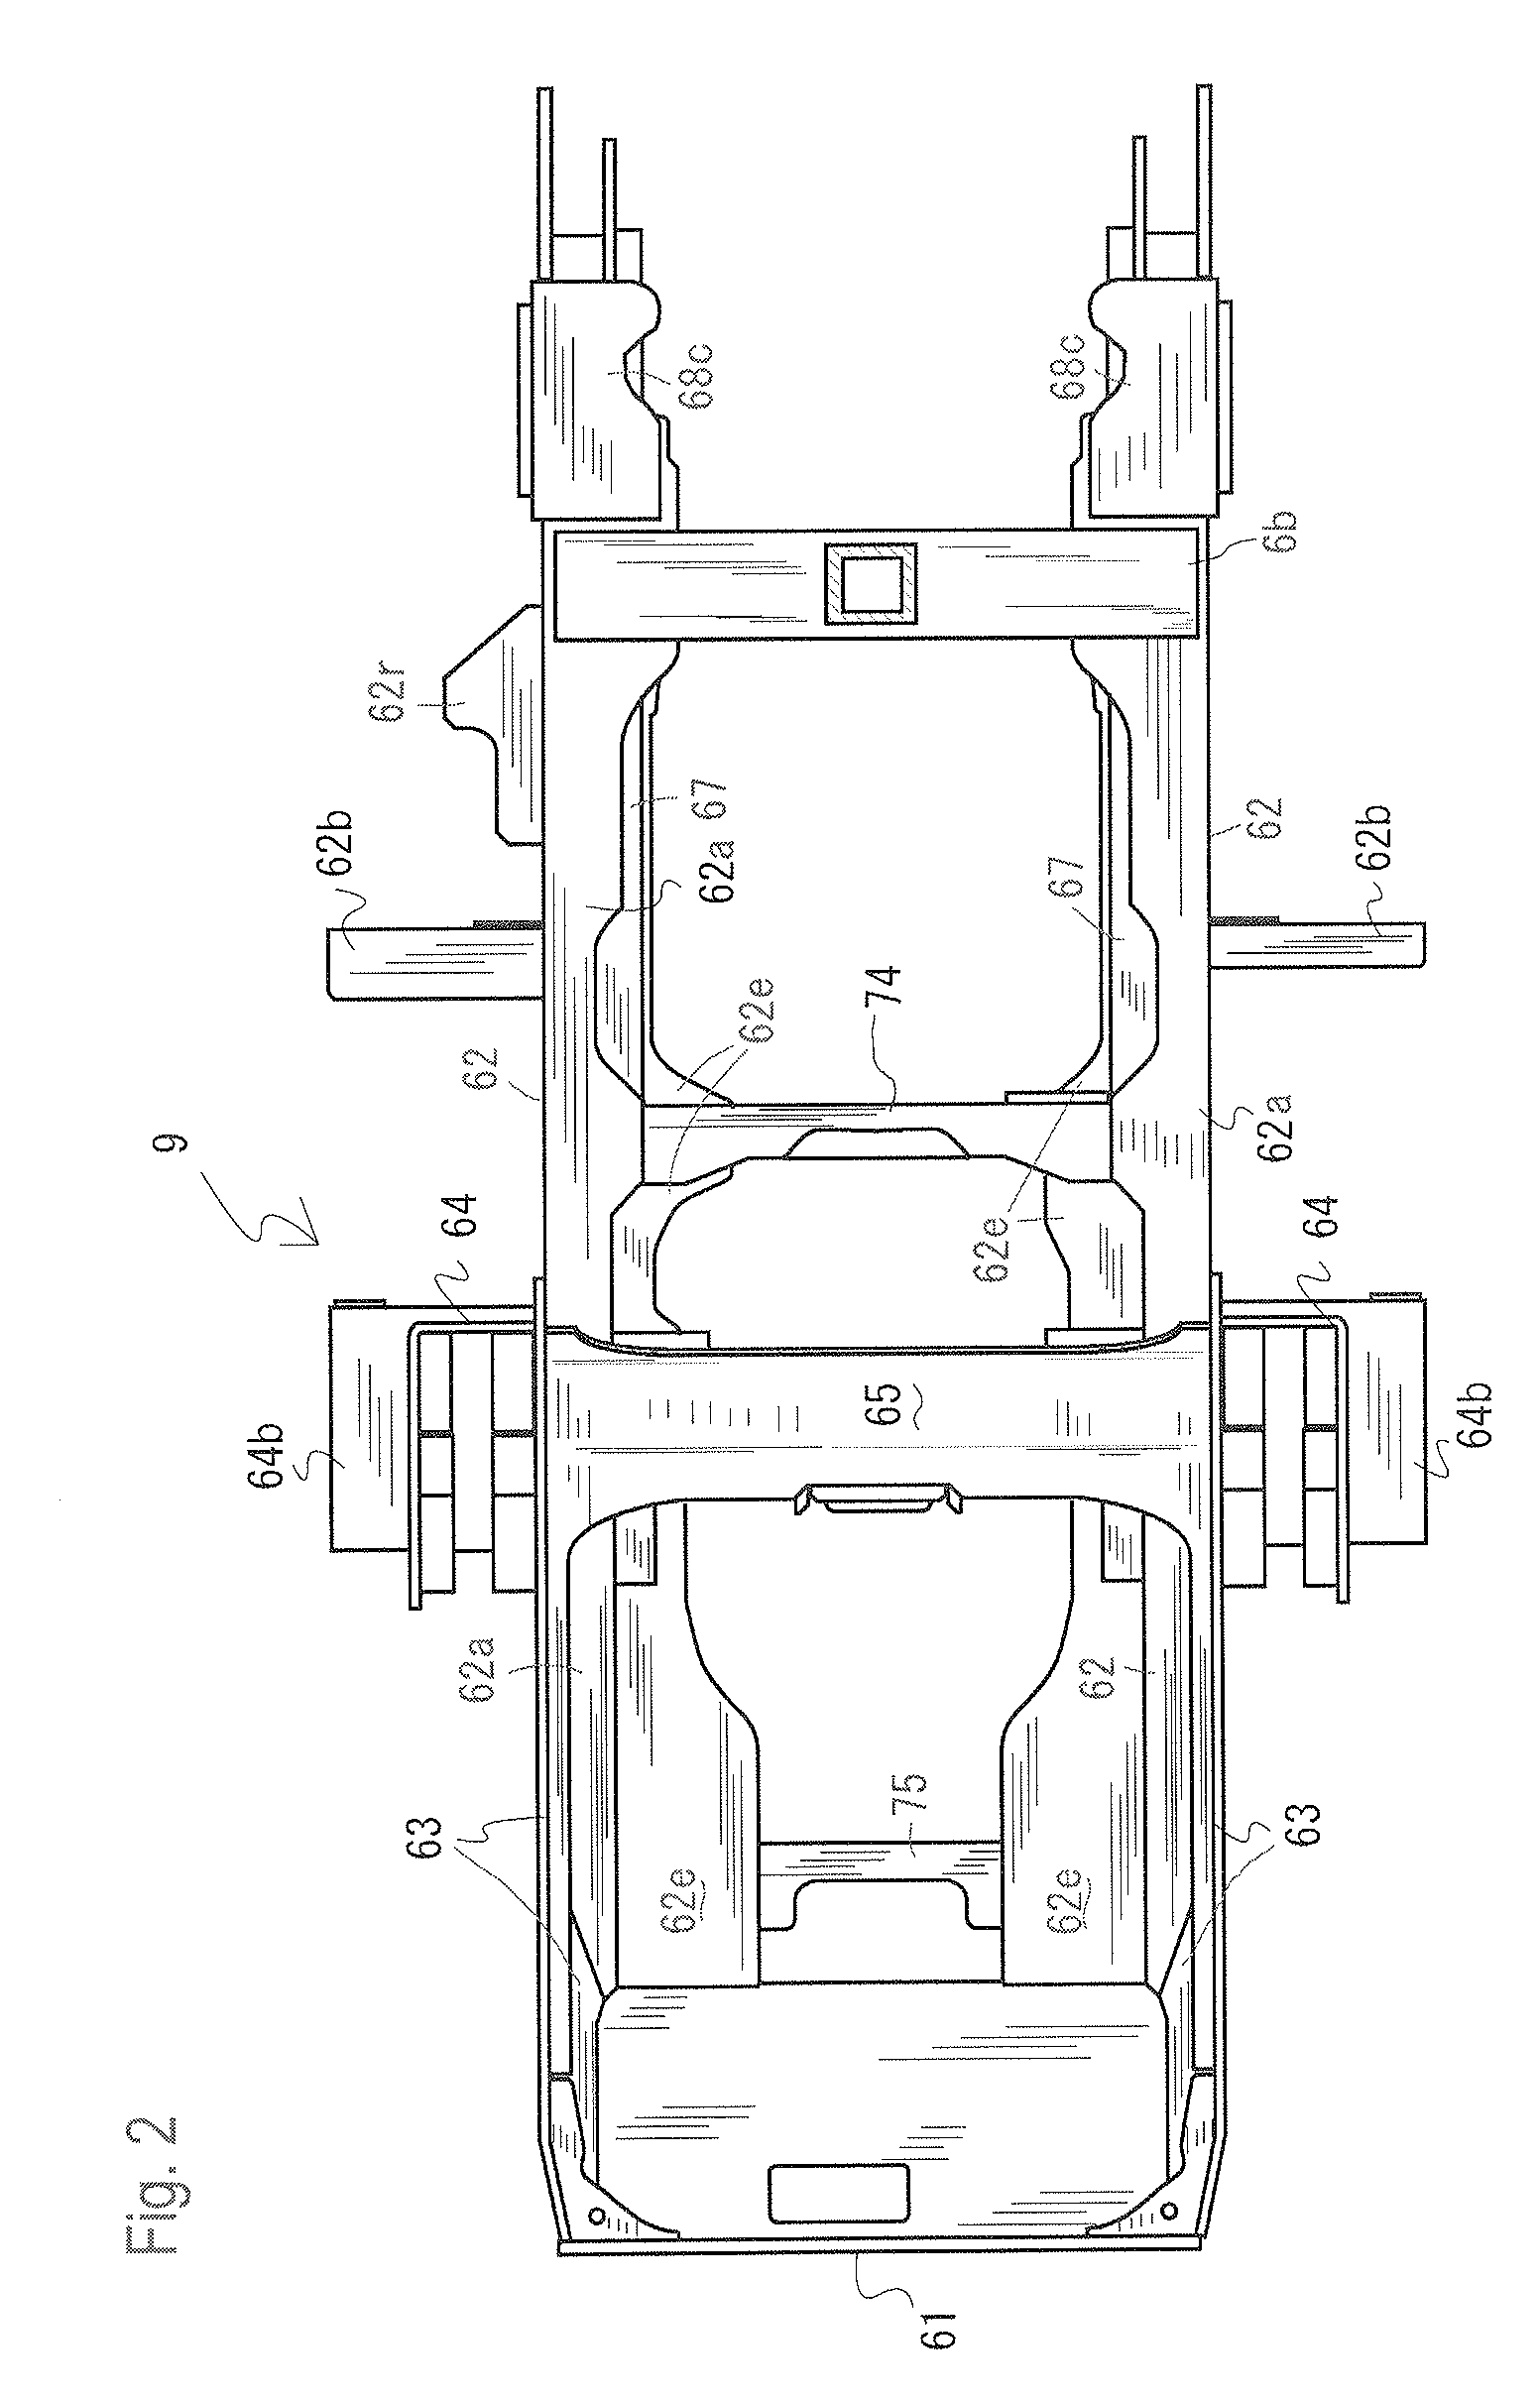 Frame structure for working vehicle